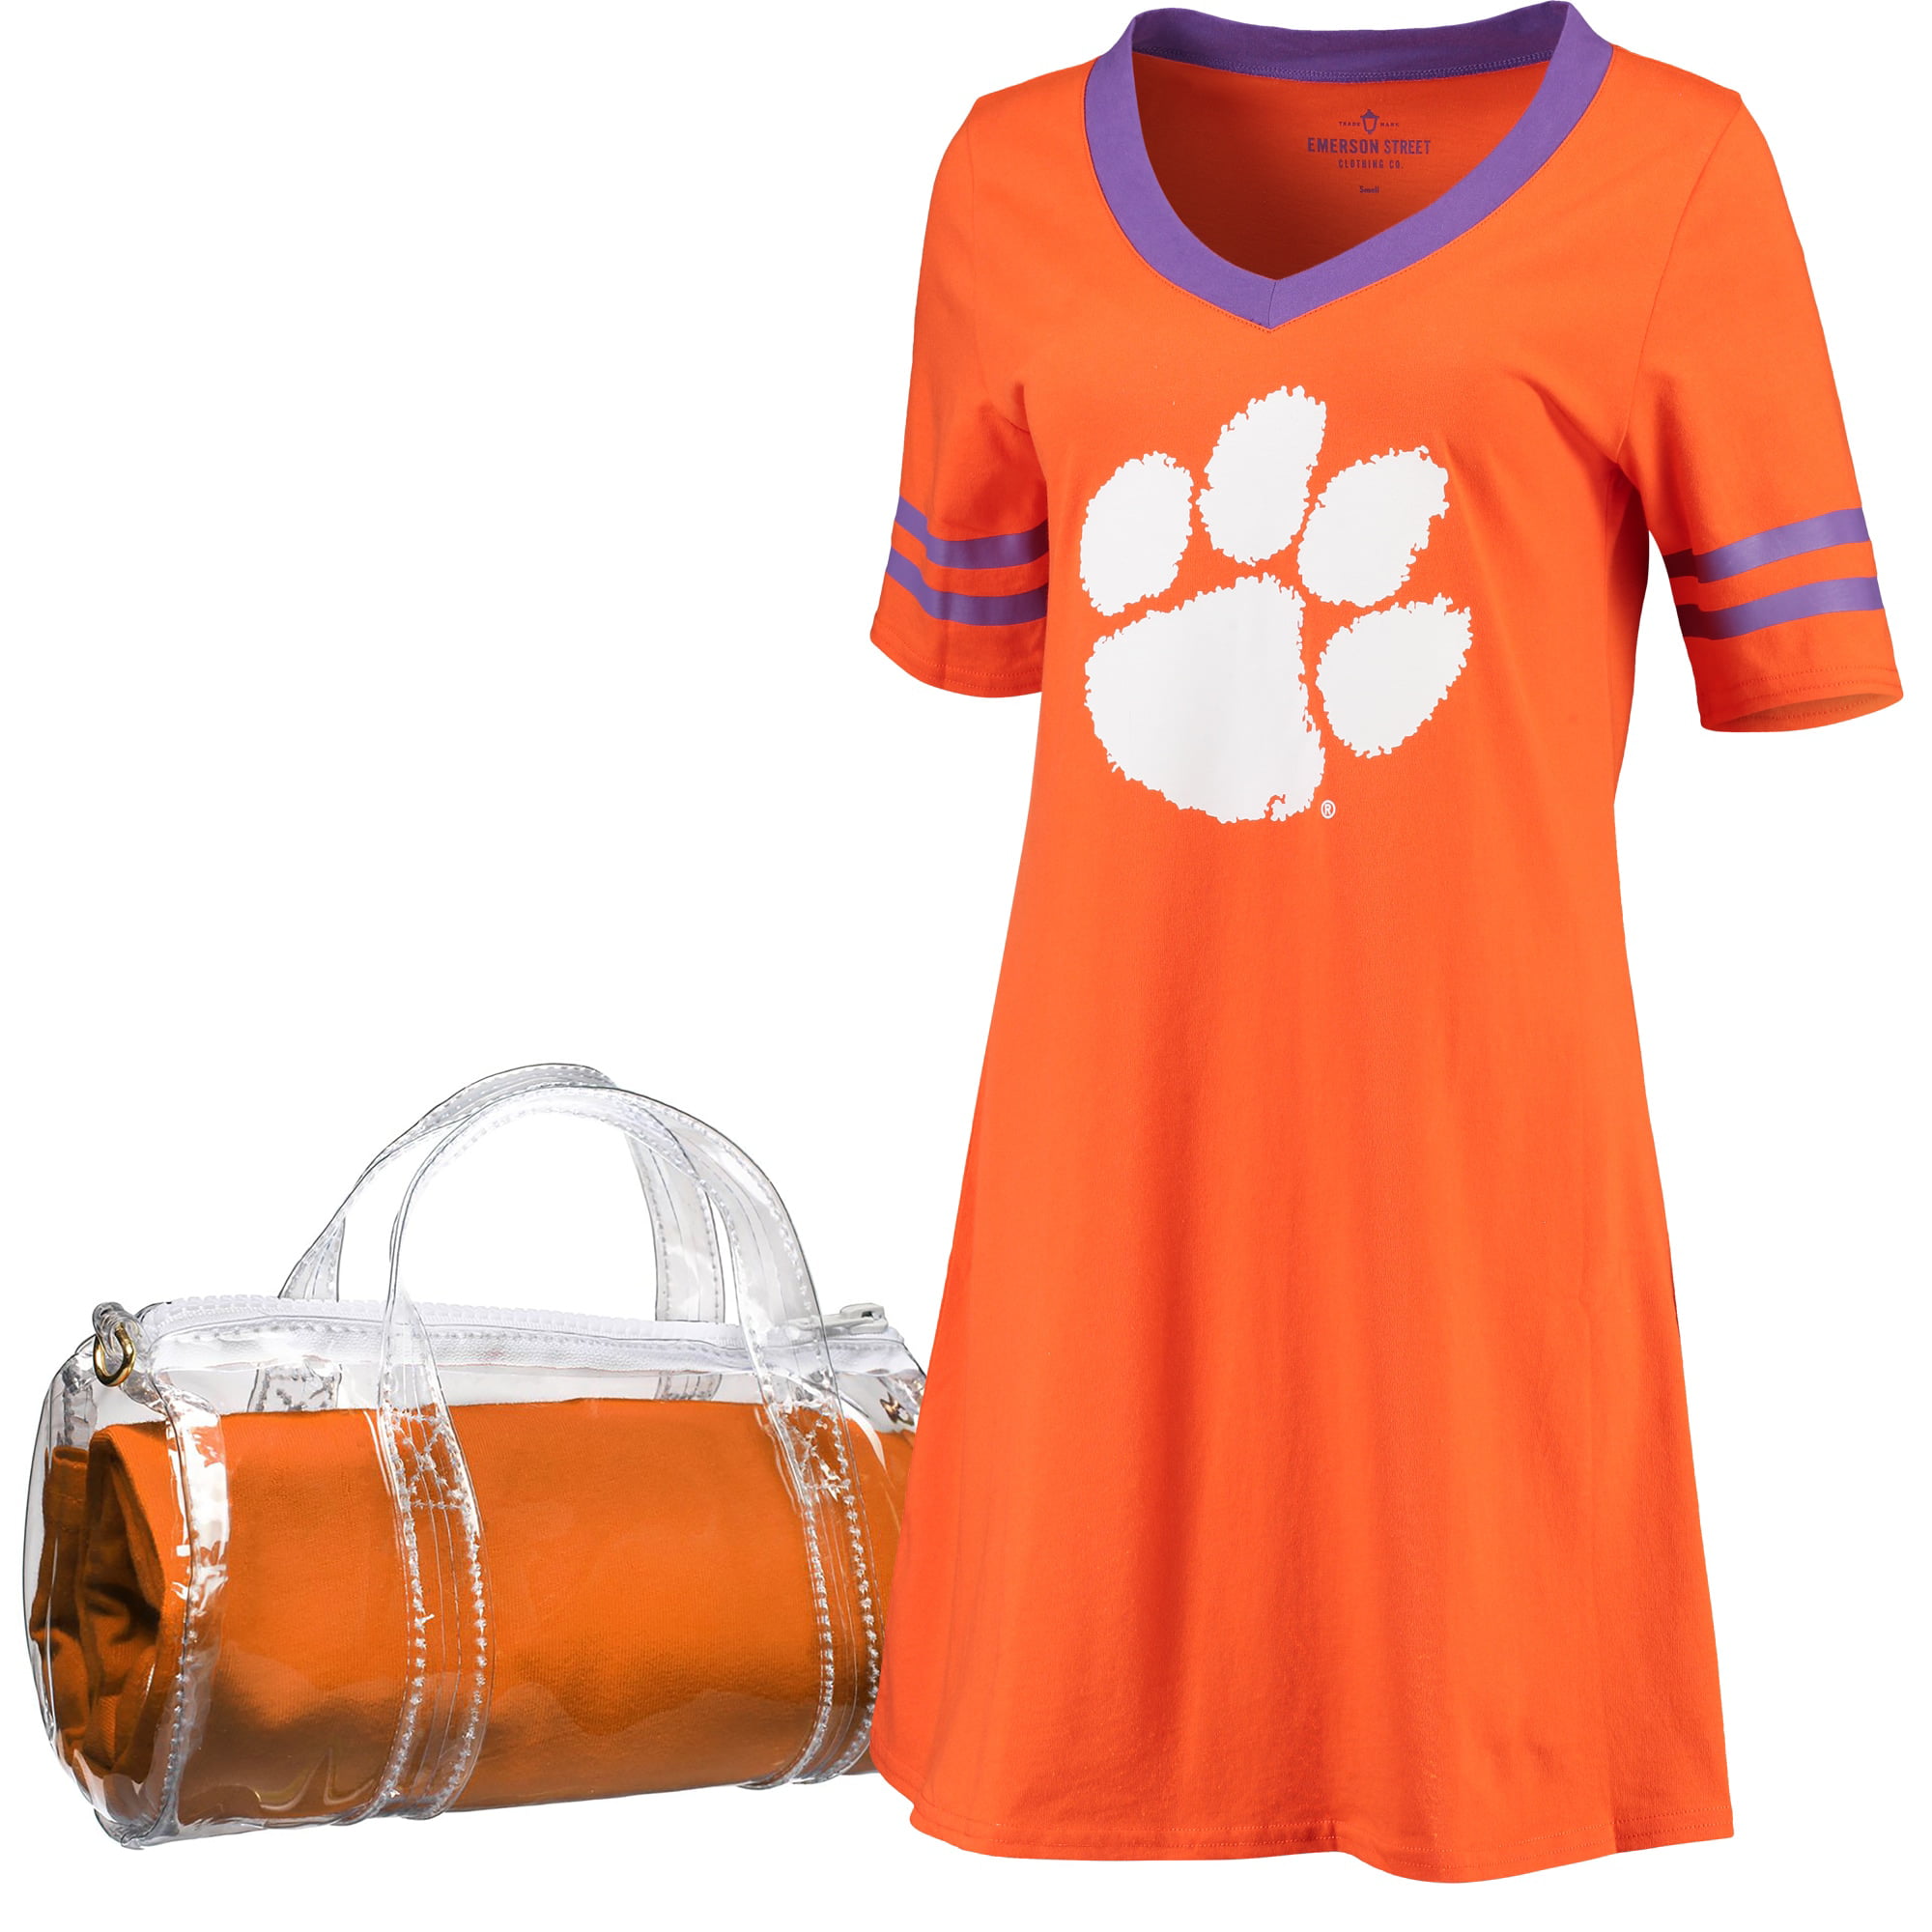 NCAA Clemson Tigers Adult Collapsible 3-in-1 Trash Can Orange